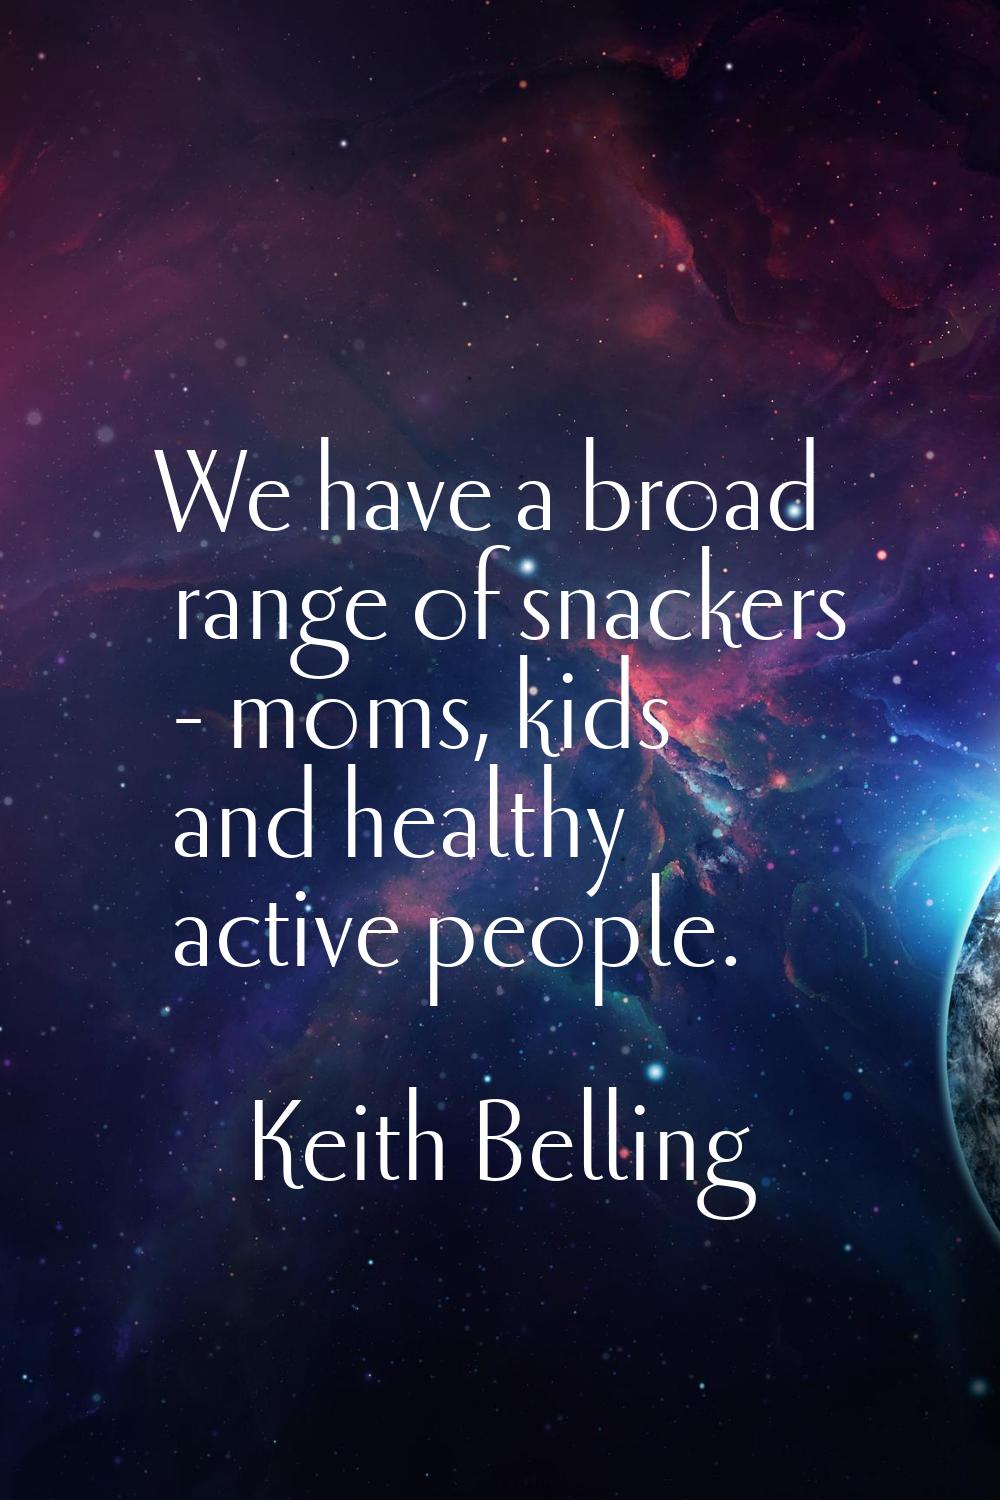 We have a broad range of snackers - moms, kids and healthy active people.